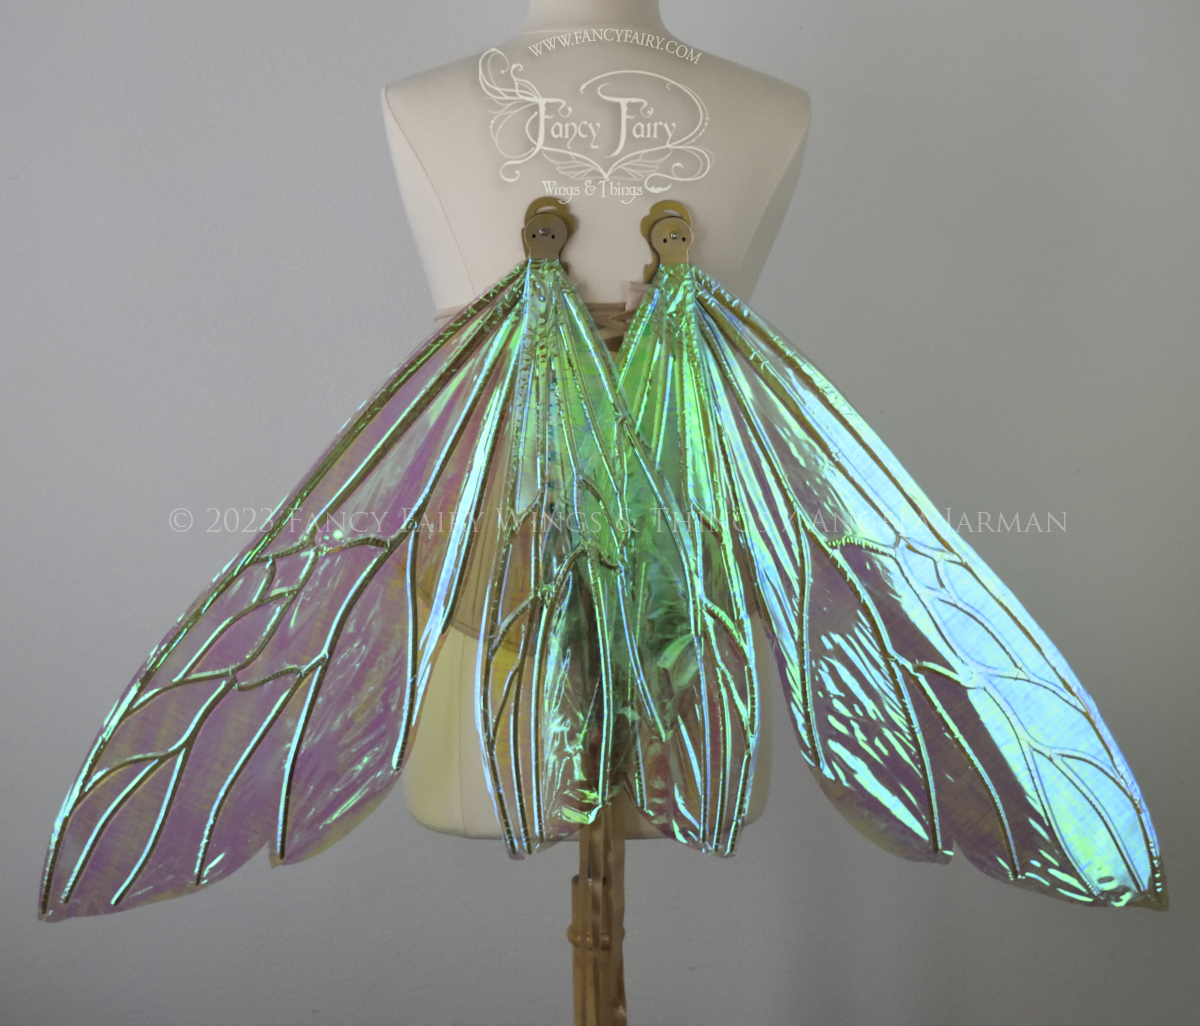 Front view of an ivory dress form wearing an alabaster underbust corset and extra large fairy wings similar to wasp wings, upper and lower panels are both elongated with rounded and slightly pointed tips. They are iridescent green / blue, with gold veins. Wings are in resting position. The background is plain white and my logo and copyright notice are visible.